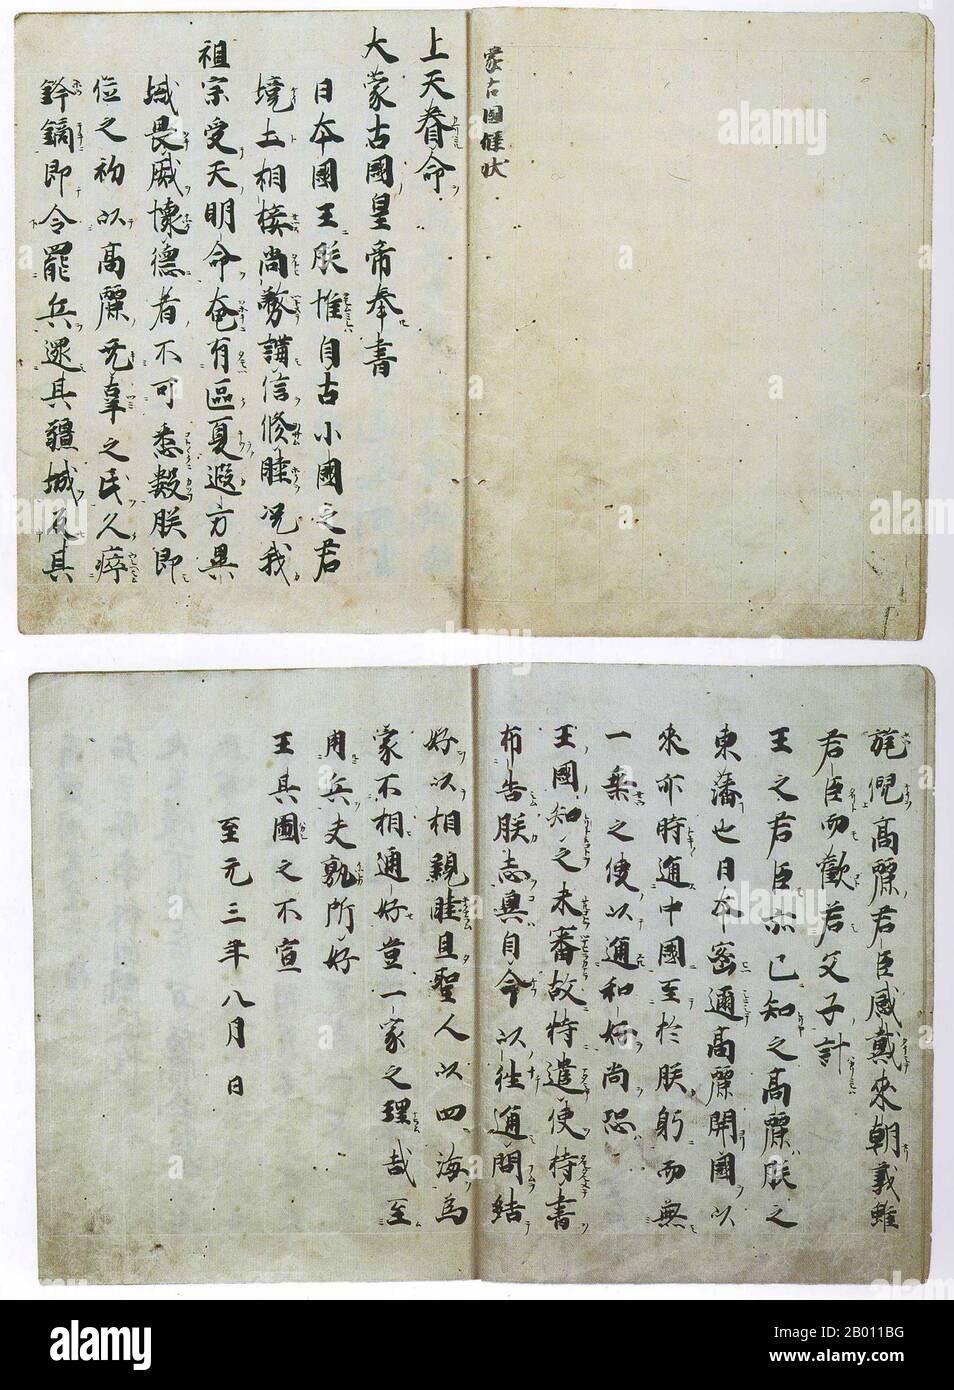 Japan: Letter from Kublai Khan to the Emperor of Japan, written in Classical Chinese (the lingua franca in East Asia at the time), dated 8th Month, 1266.  The Mongol invasions of Japan of 1274 and 1281 were major military invasions undertaken by Kublai Khan to conquer the Japanese islands after the submission of Korea. Despite their ultimate failure, the invasion attempts are of historical importance, because they set a limit on Mongol expansion, and rank as nation-defining events in Japanese history. The Japanese were successful, in part because the Mongol army was devastated by storms at sea Stock Photo